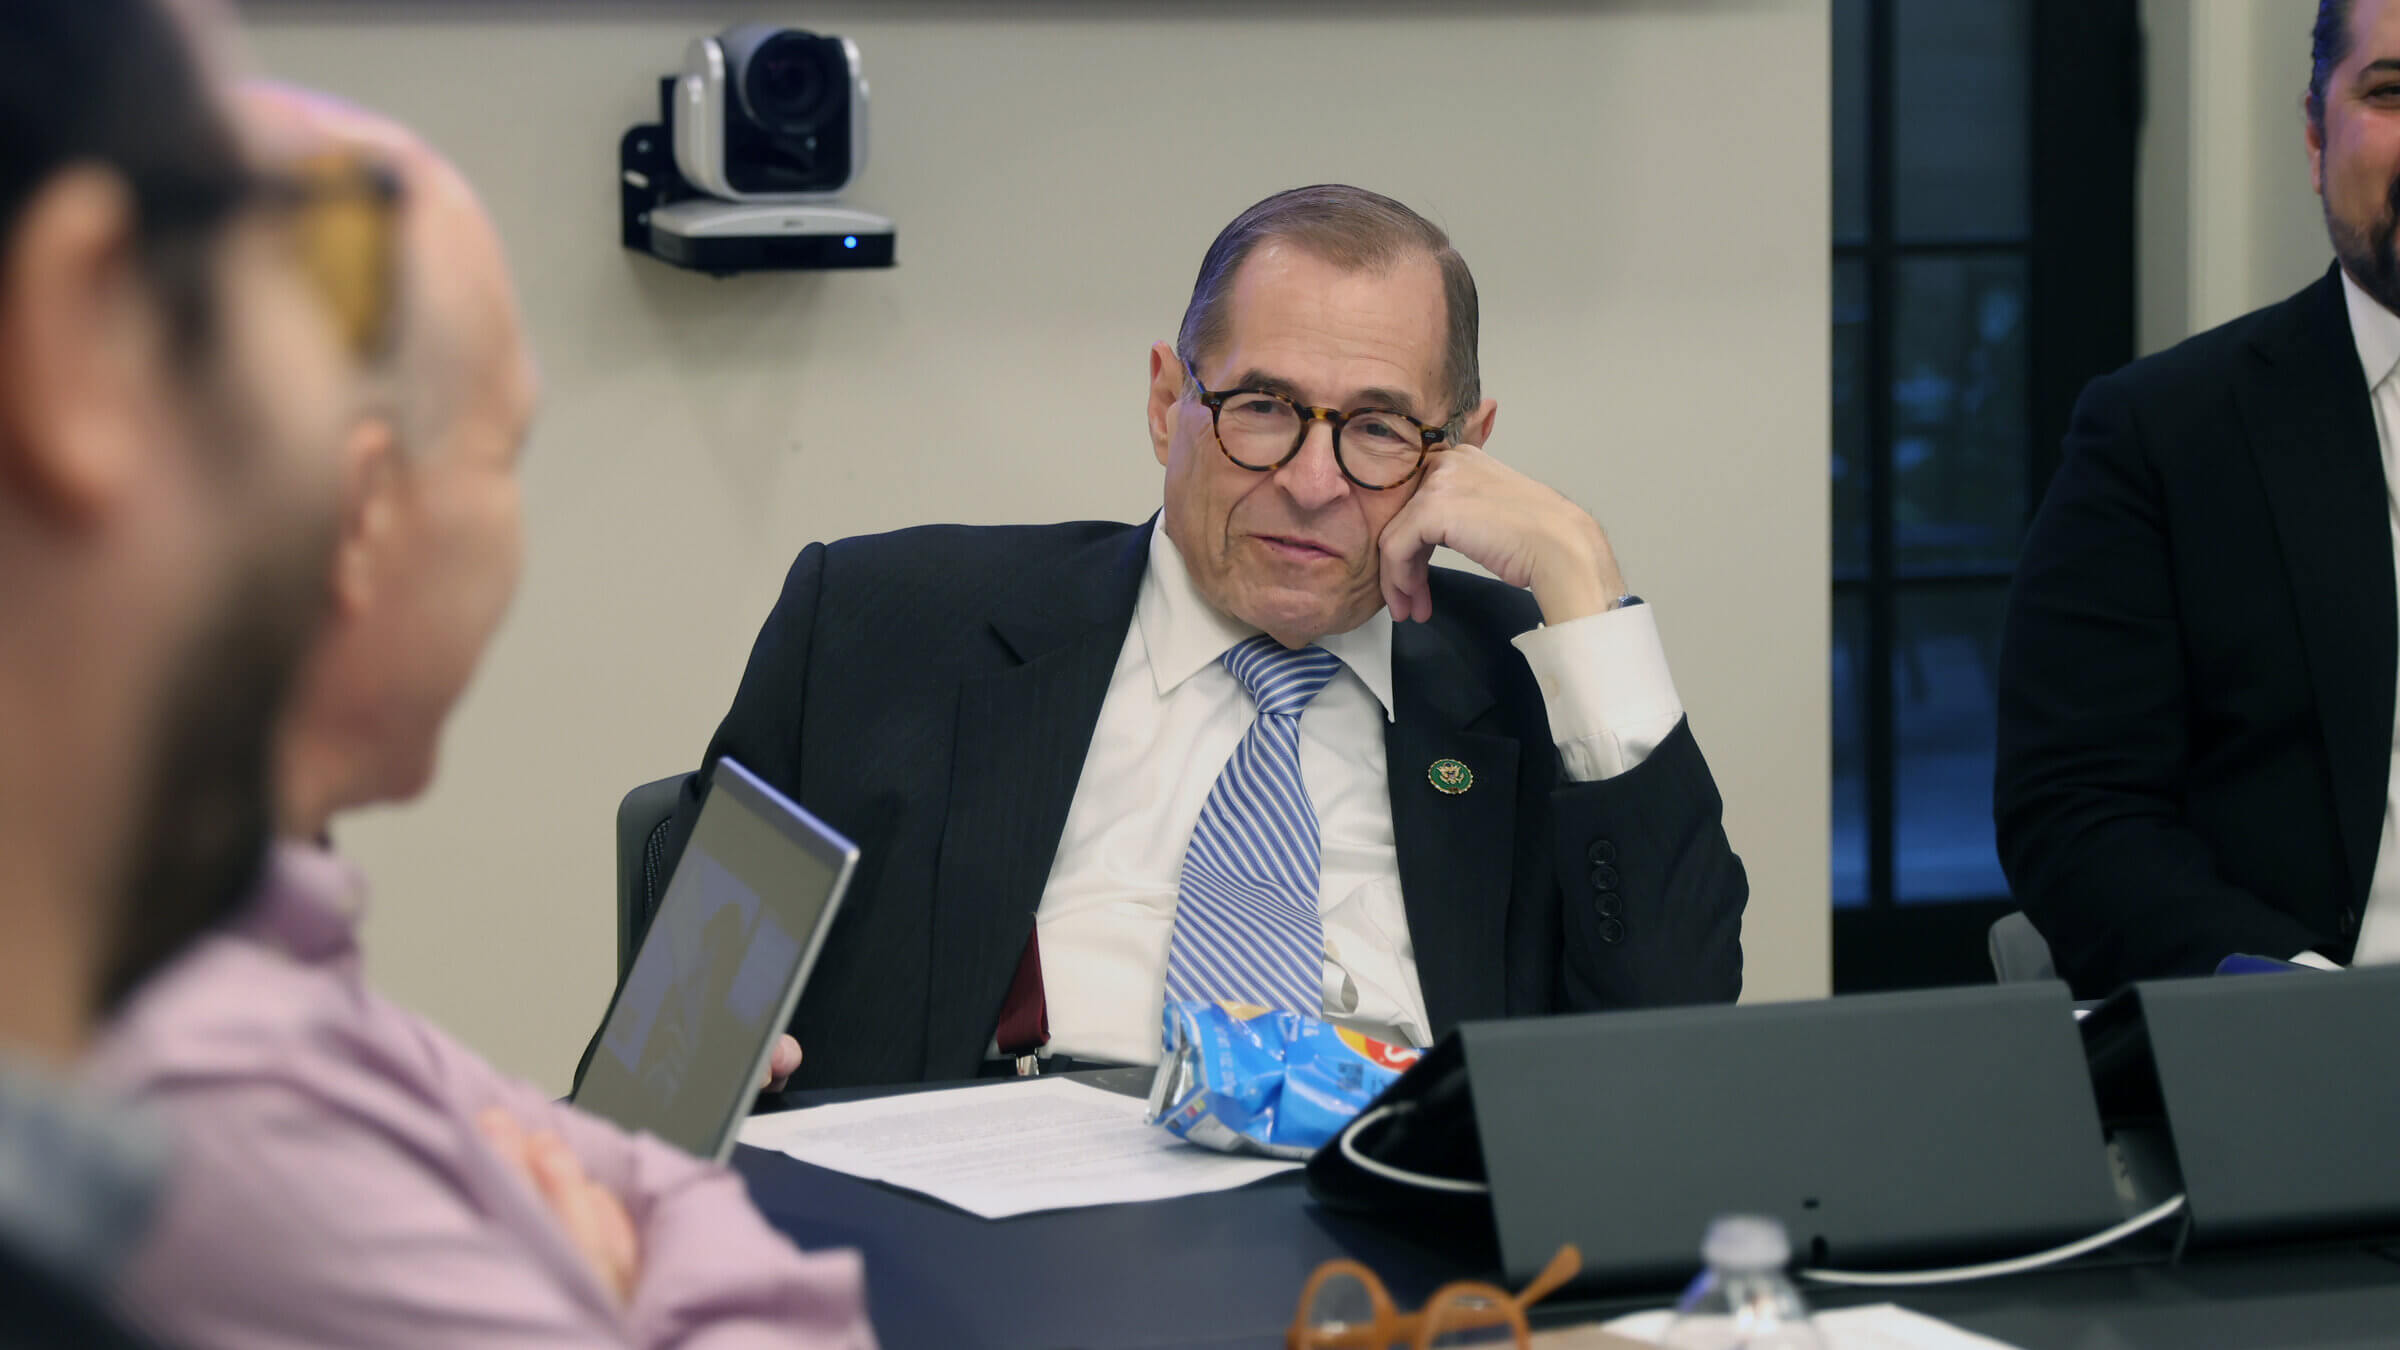 Rep. Jerry Nadler meets with constituents in October. The longest-serving Jewish member of Congress, Nadler voted against a resolution condemning antisemitism in December, arguing that it was a political ploy by Republicans.